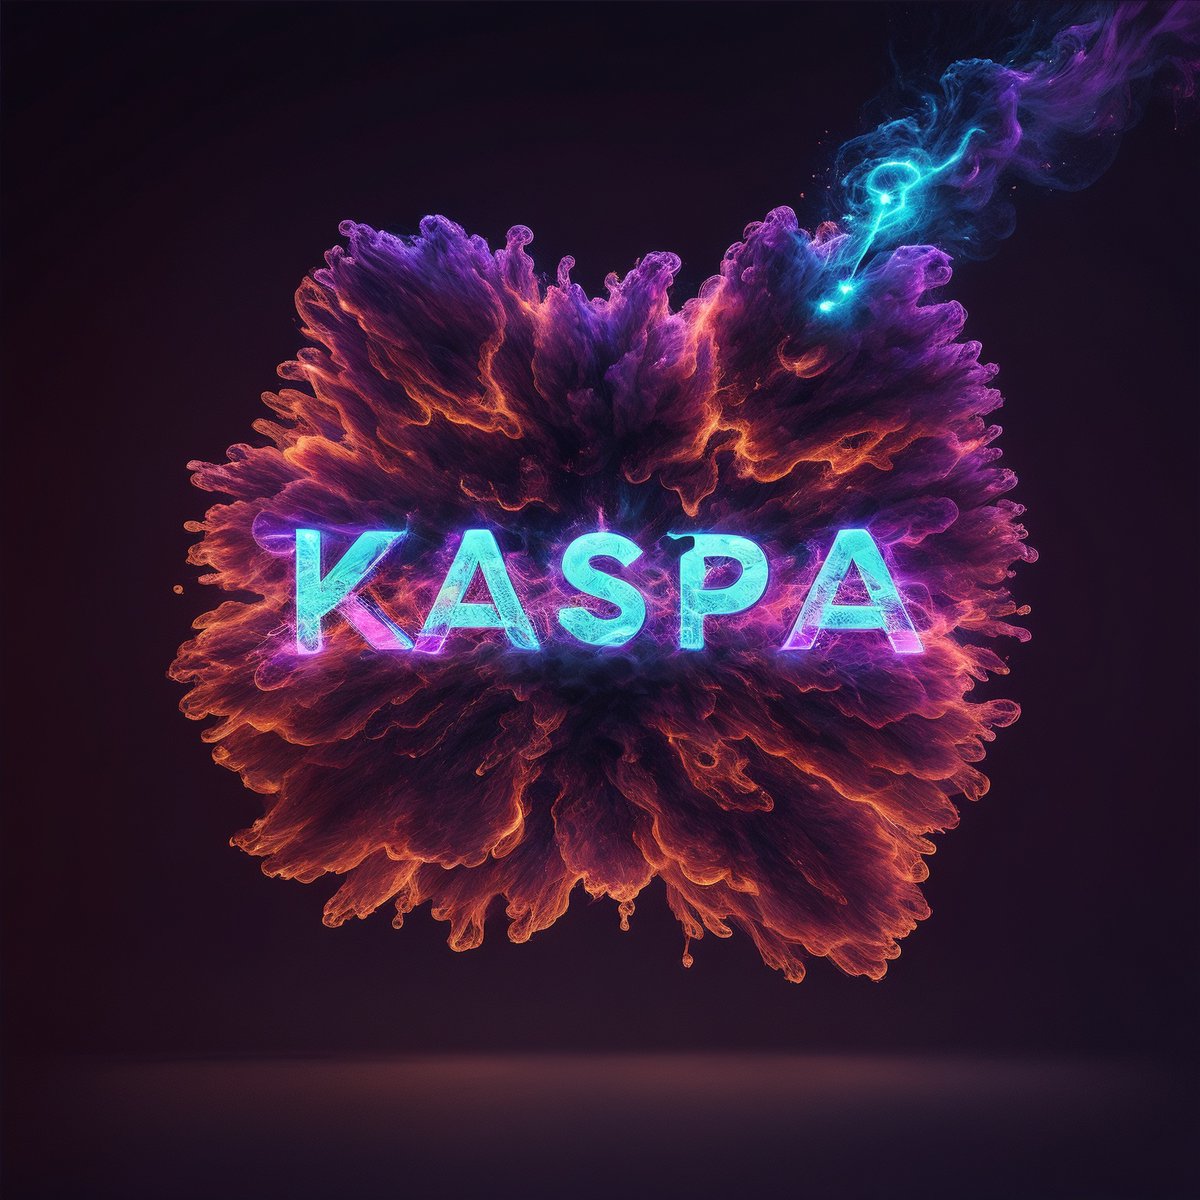 While $BTC fell short as a P2P electronic cash system, $KAS shines by staying true to the Nakamoto Consensus & enhancing it with groundbreaking innovations. This crypto preserves the core tenets of decentralization & #security, setting a new standard. $KAS #Kaspa